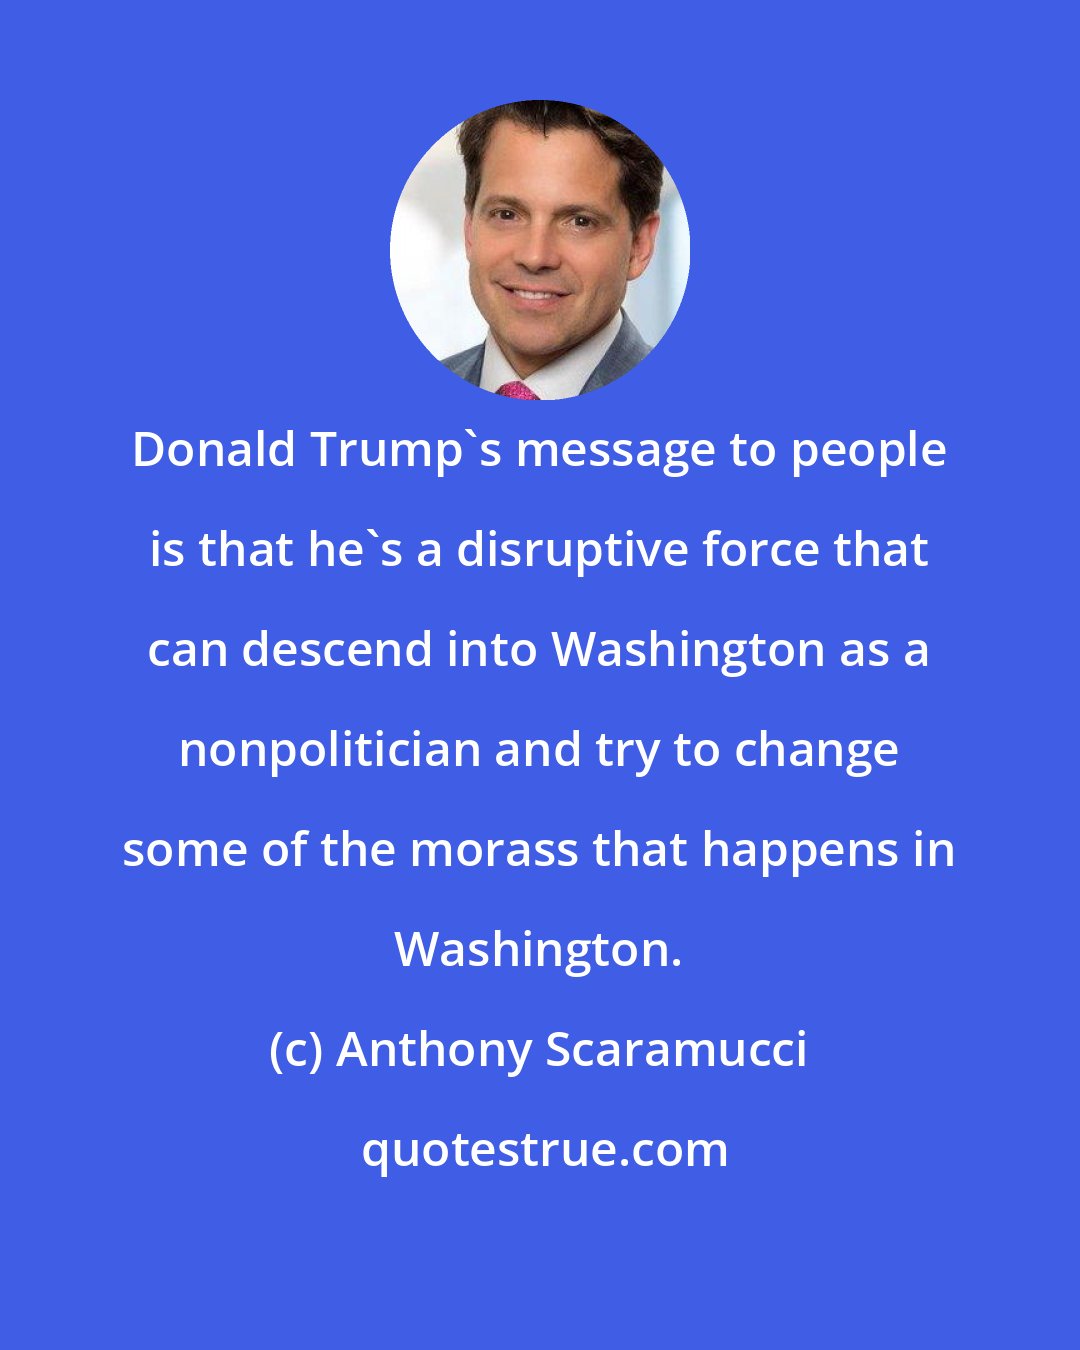 Anthony Scaramucci: Donald Trump's message to people is that he's a disruptive force that can descend into Washington as a nonpolitician and try to change some of the morass that happens in Washington.